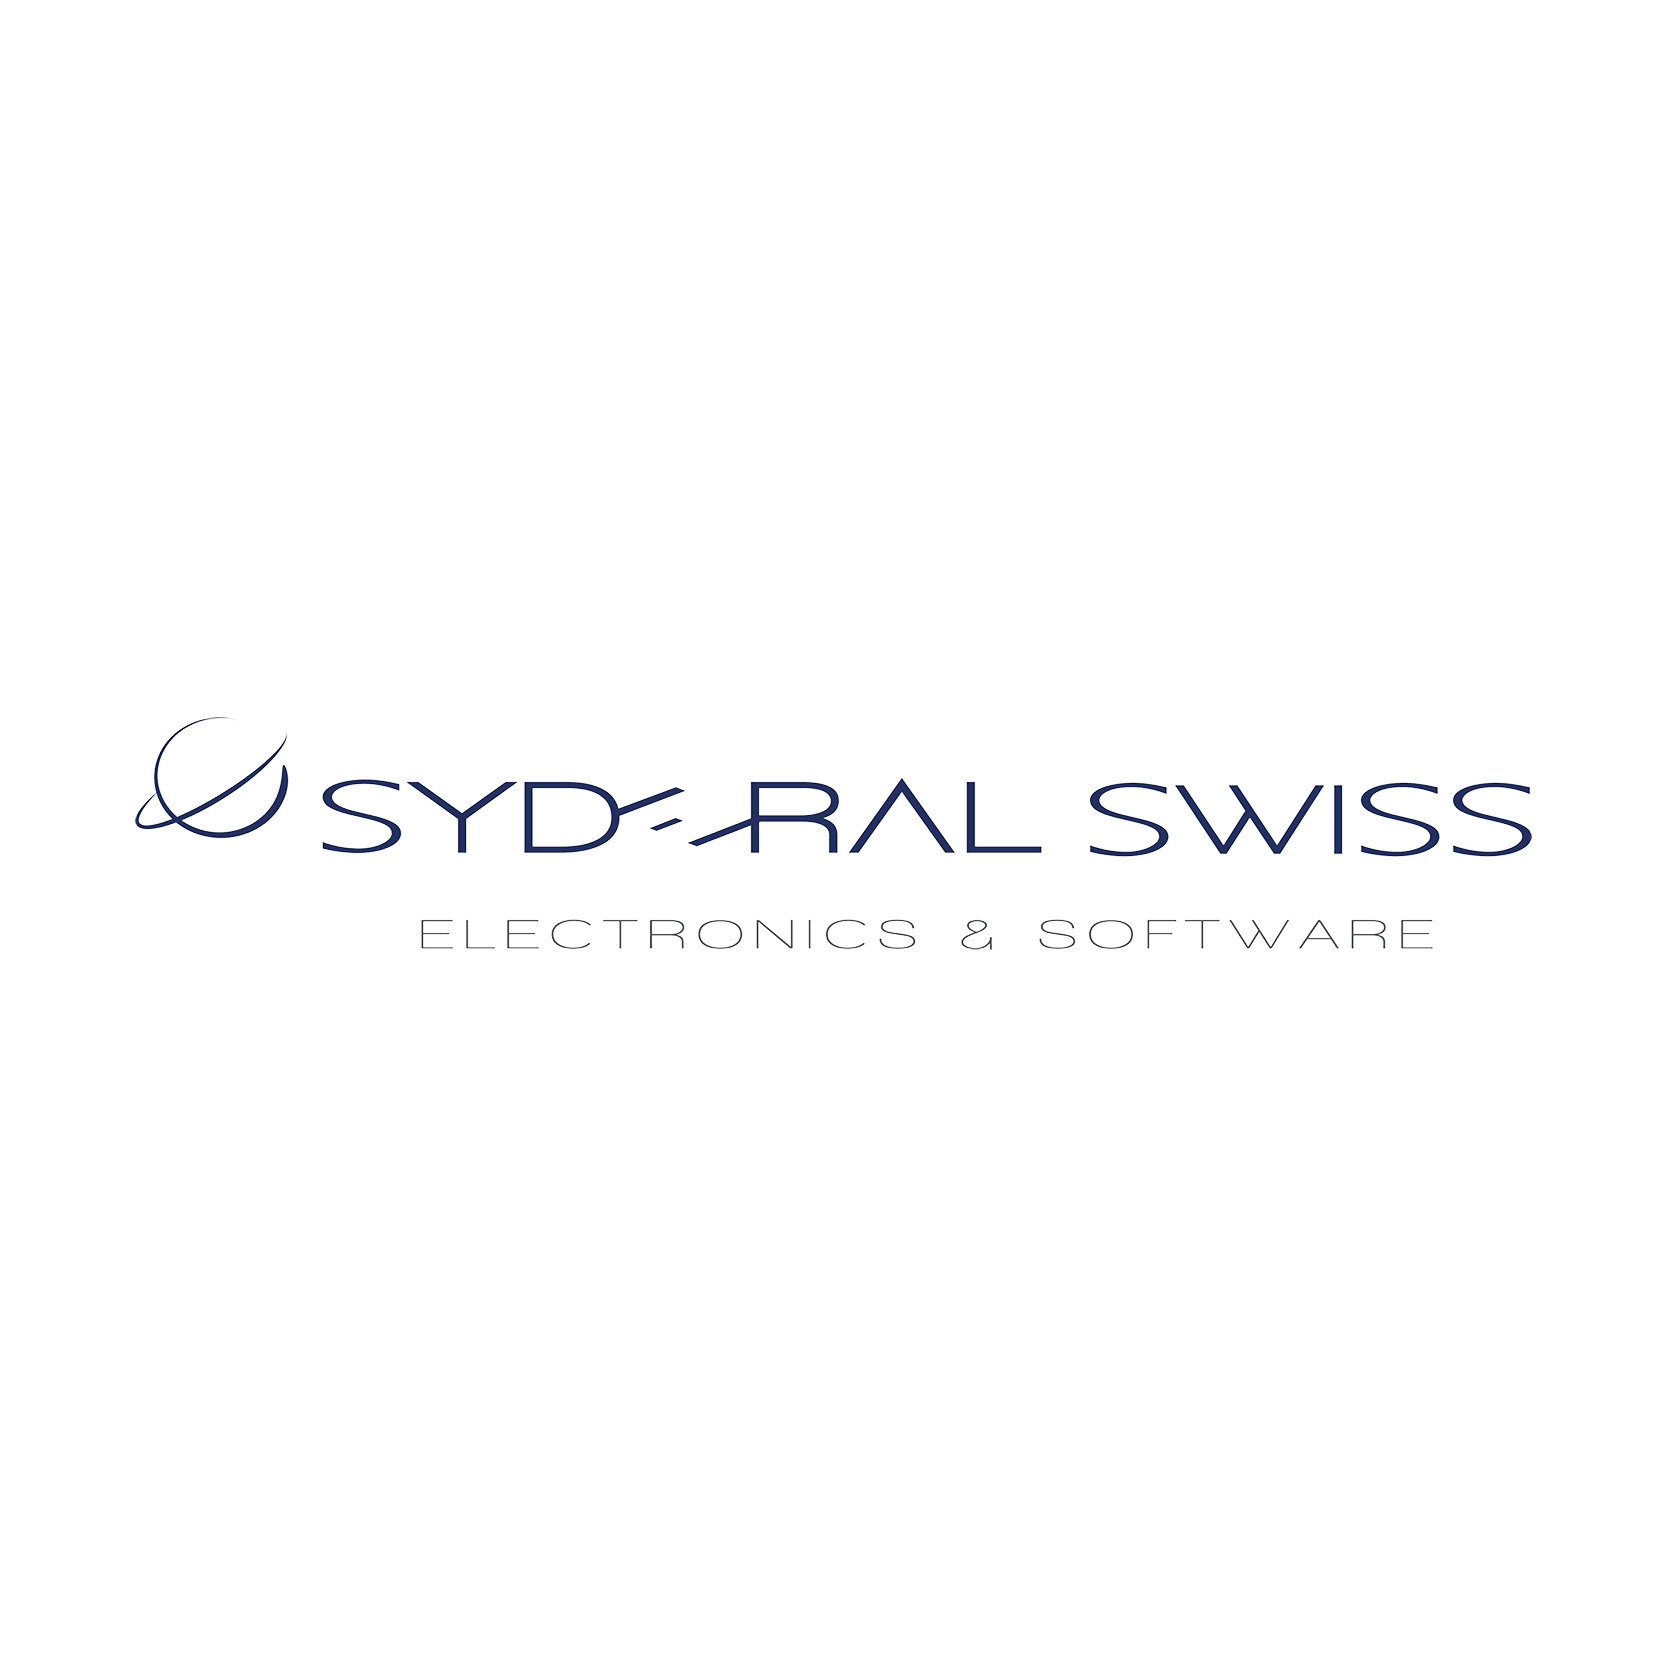 Syderal Swiss